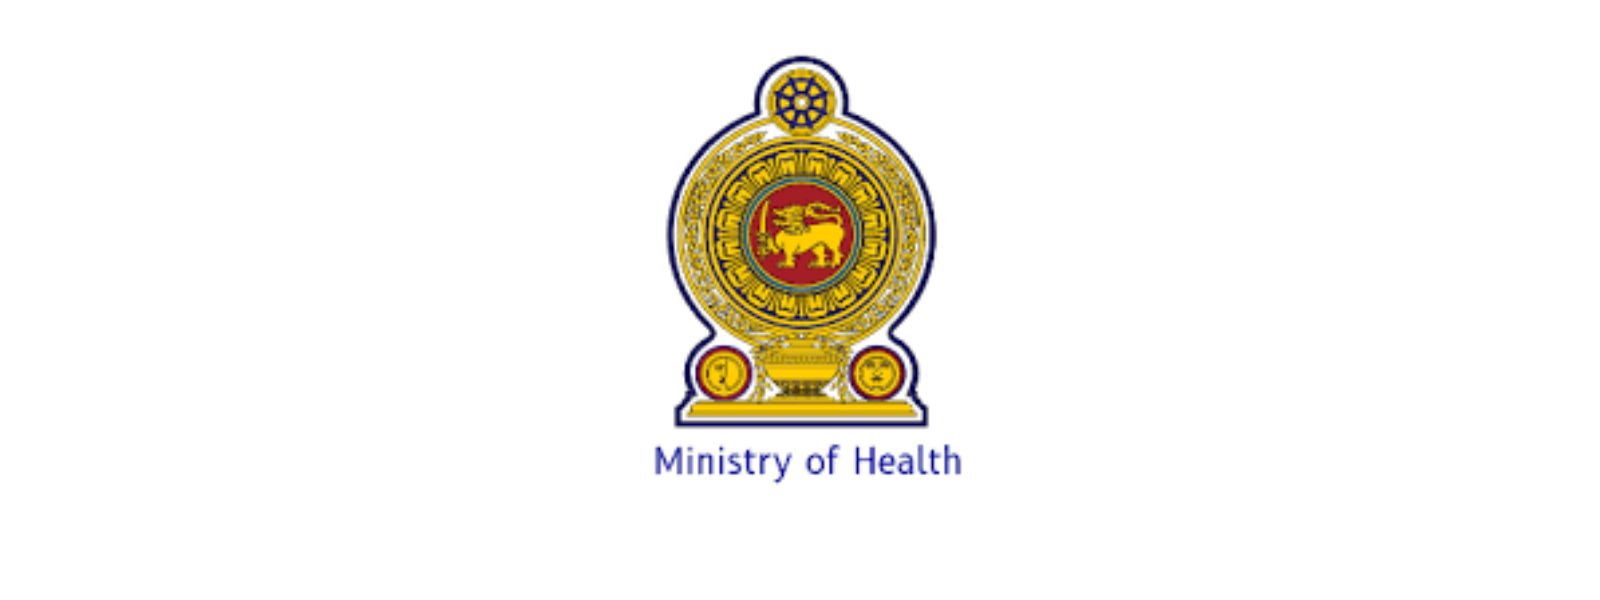 Ministry Of Health Sri Lanka  The Ministry of Health is the